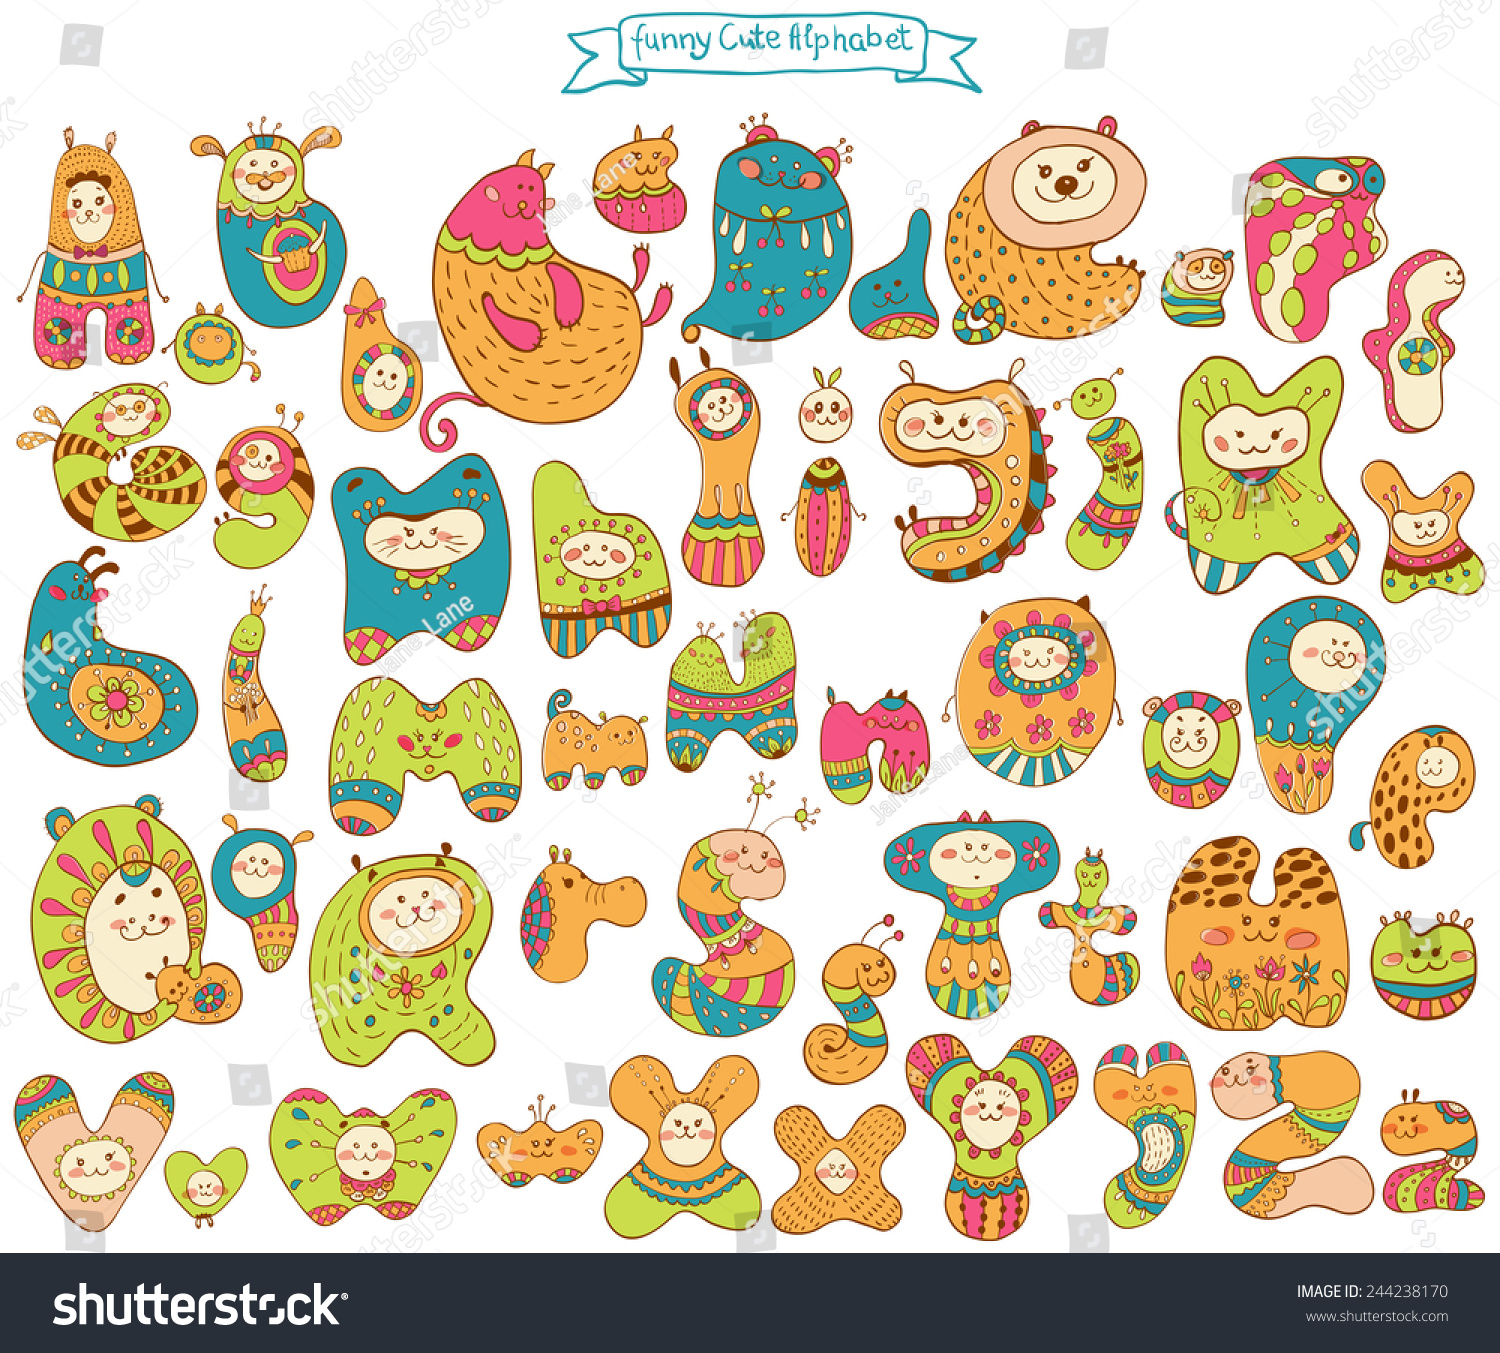 animal letters clipart - photo #26